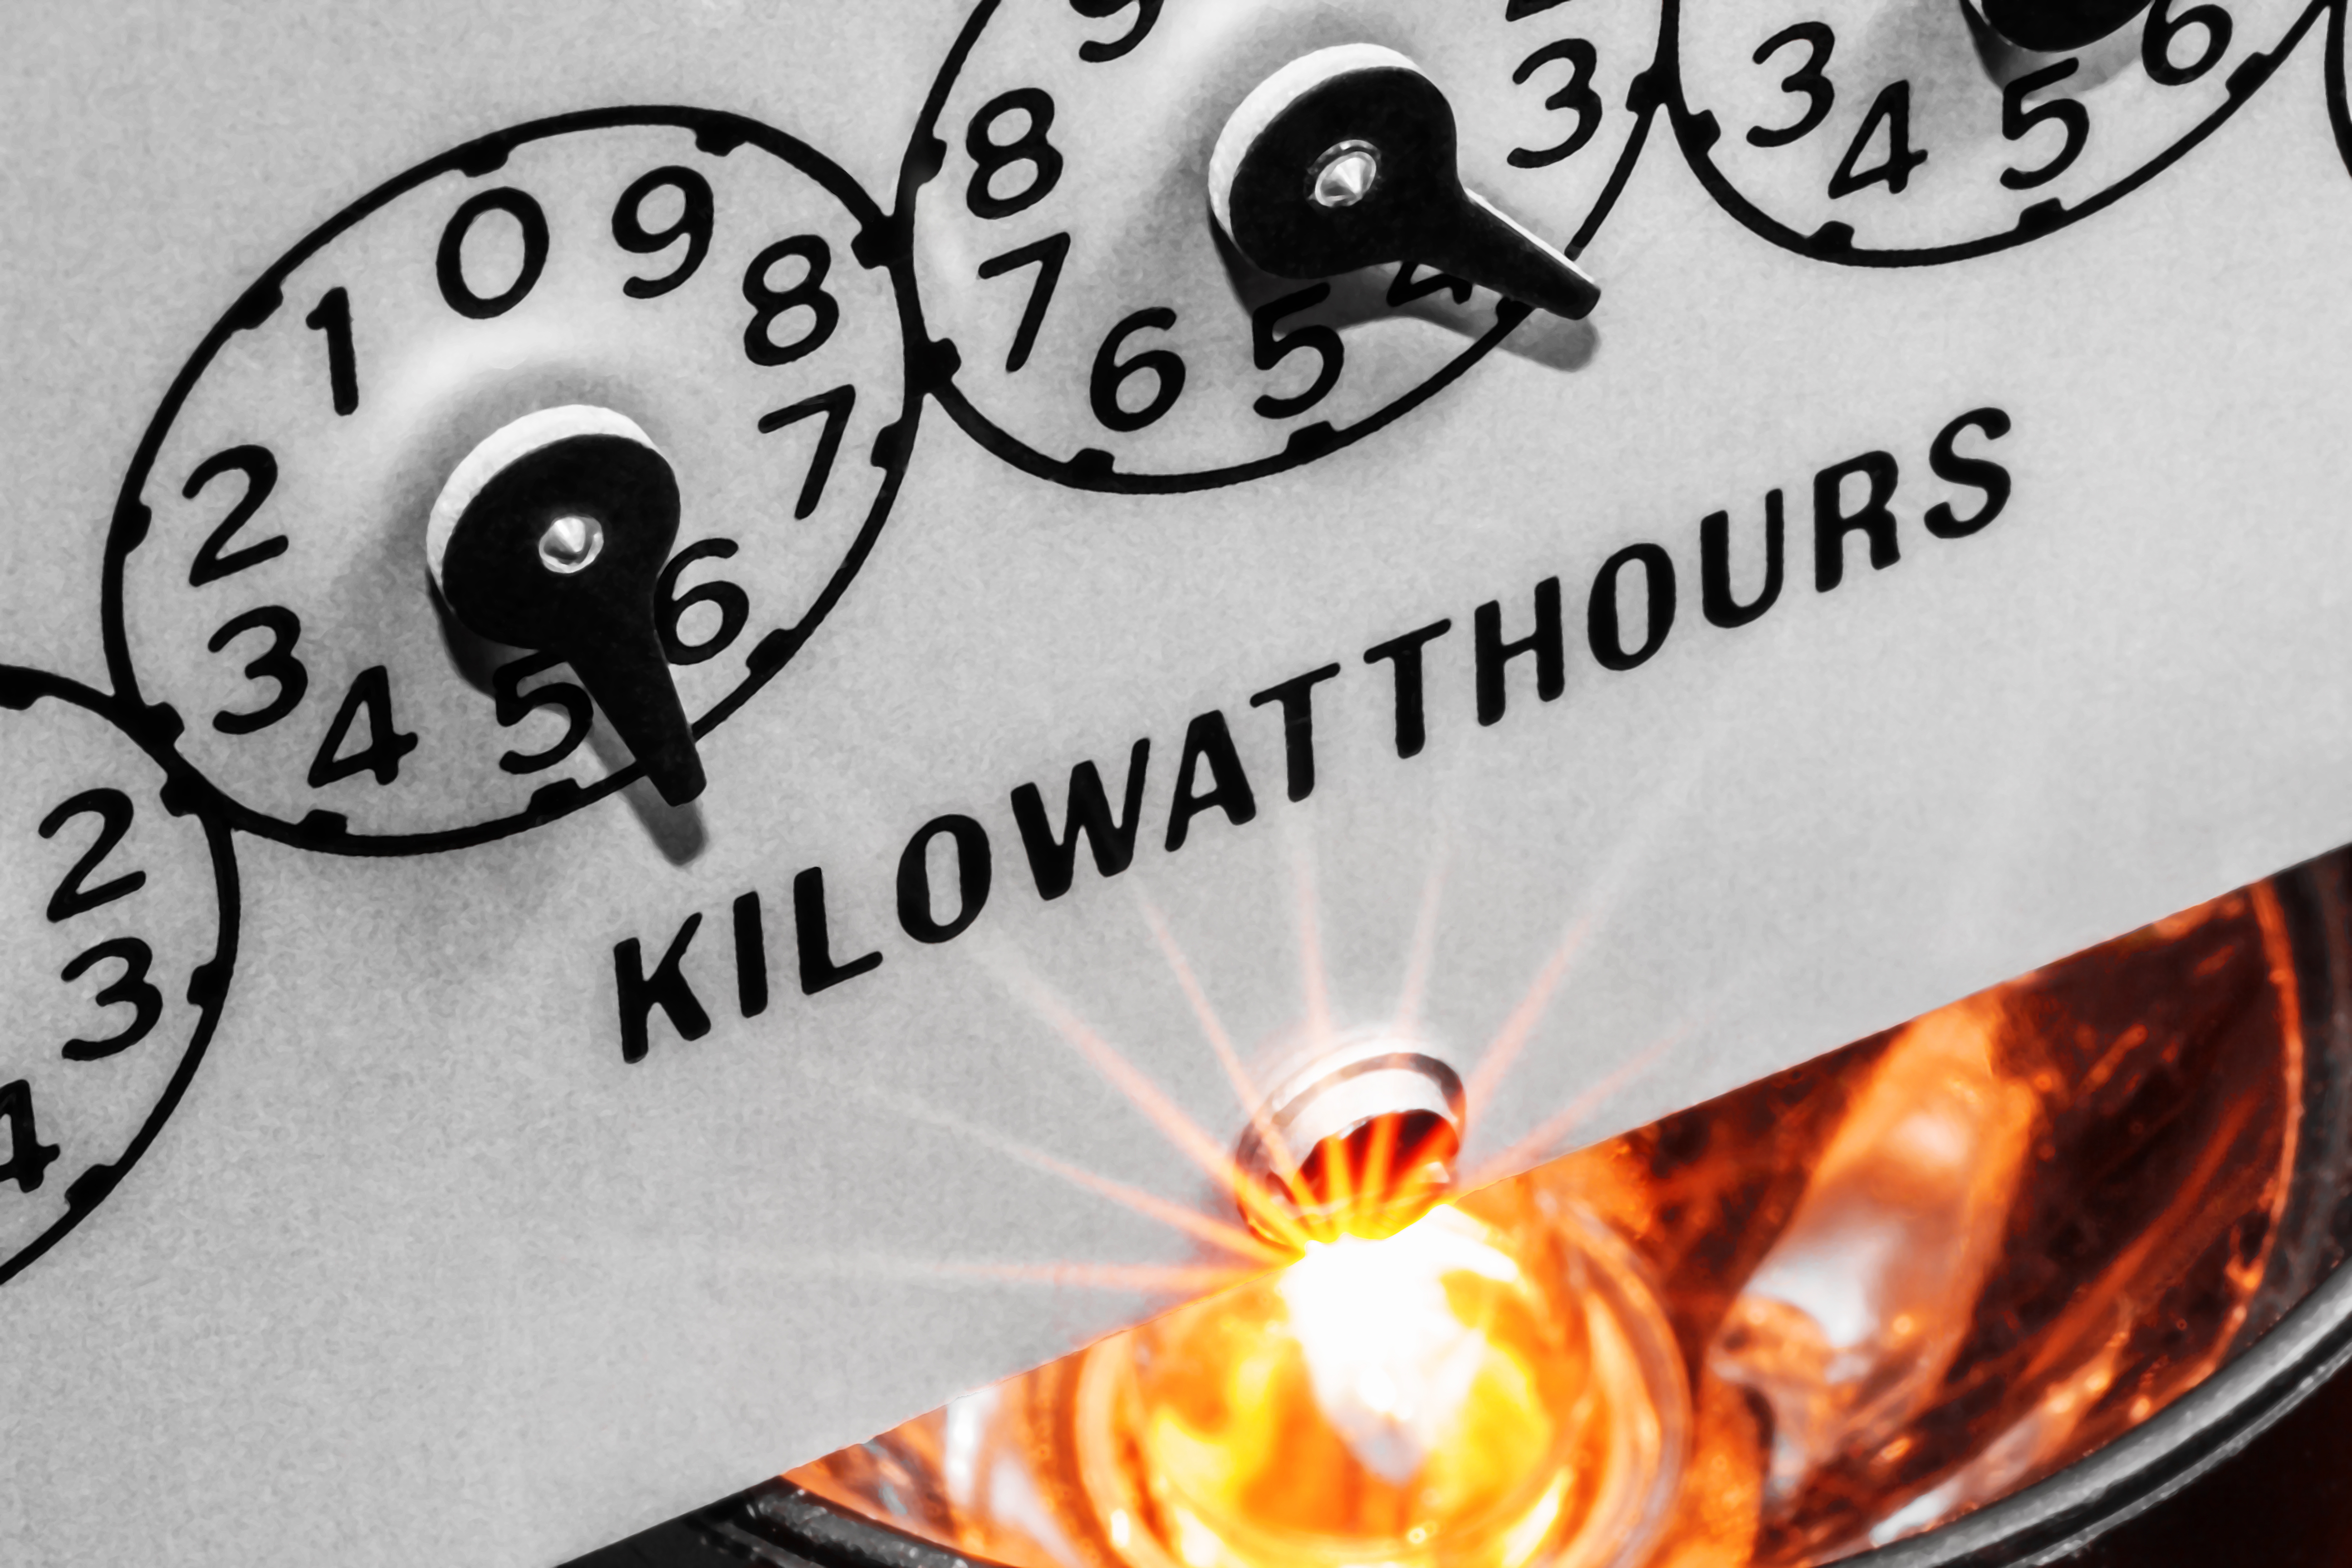 Kilowatthour electric meter register dials with light bulb shining below